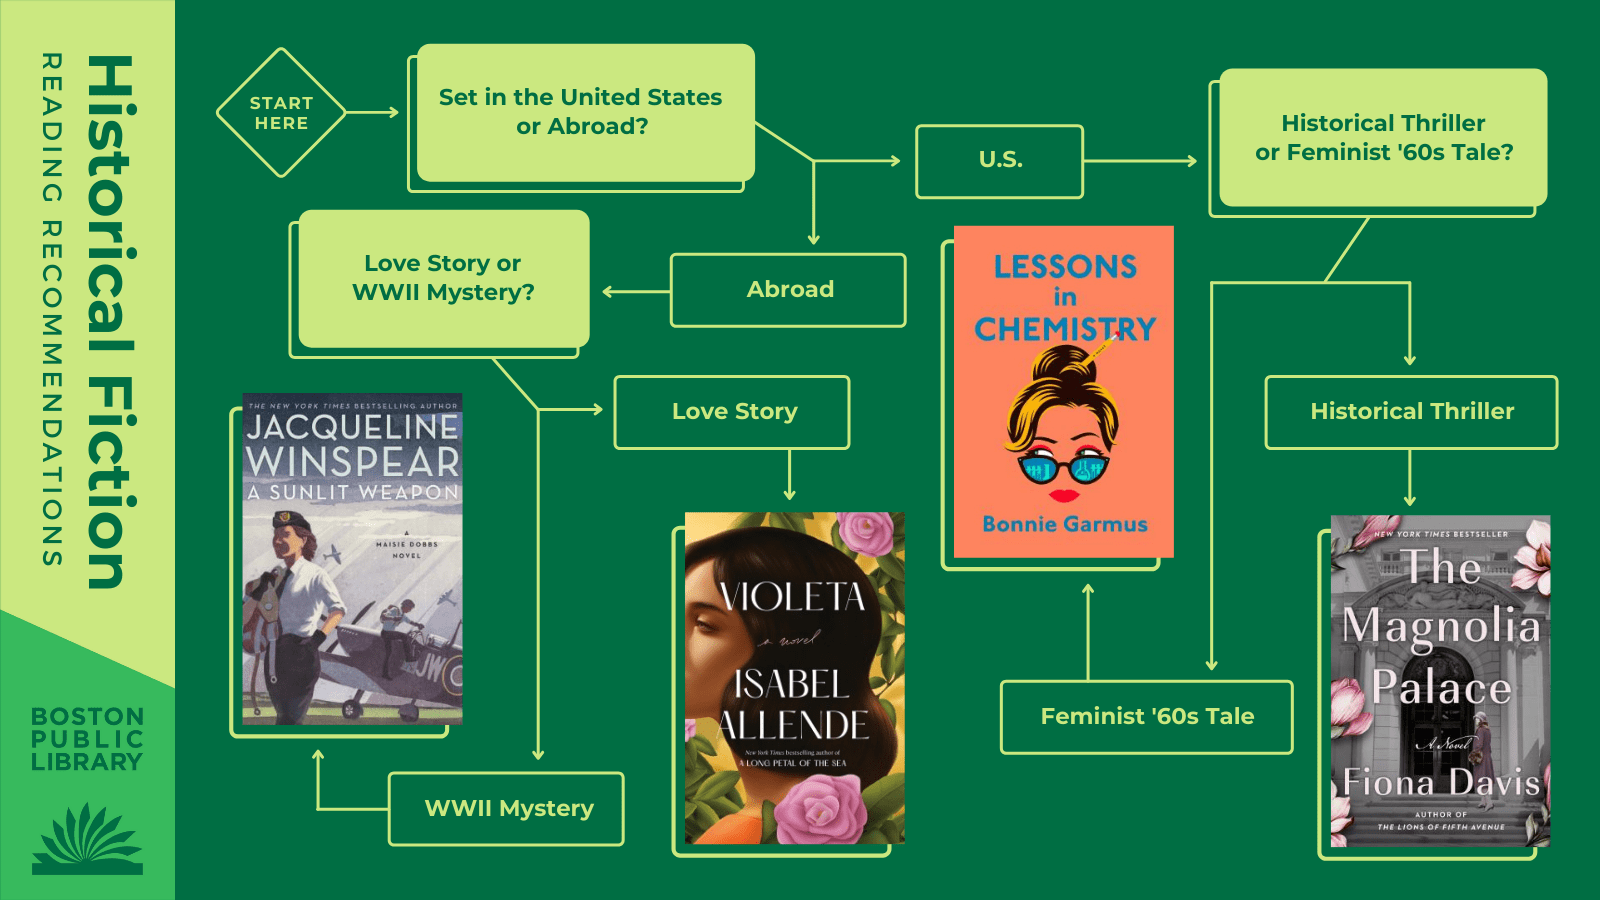 Q1: Set In the United States or Abroad? United States → Q2: Historical Thriller or Feminist 60s Tale? Historical Thriller: The Magnolia Palace by Fiona Davis | Fun Feminist 60s Tale: Lessons in Chemistry by Bonnie Garmus | Abroad → Q3: Love Story or World War II Mystery? Love Story: Violeta by Isabel Allende | World War II Mystery: A Sunlit Weapon by Jacqueline Winspear.